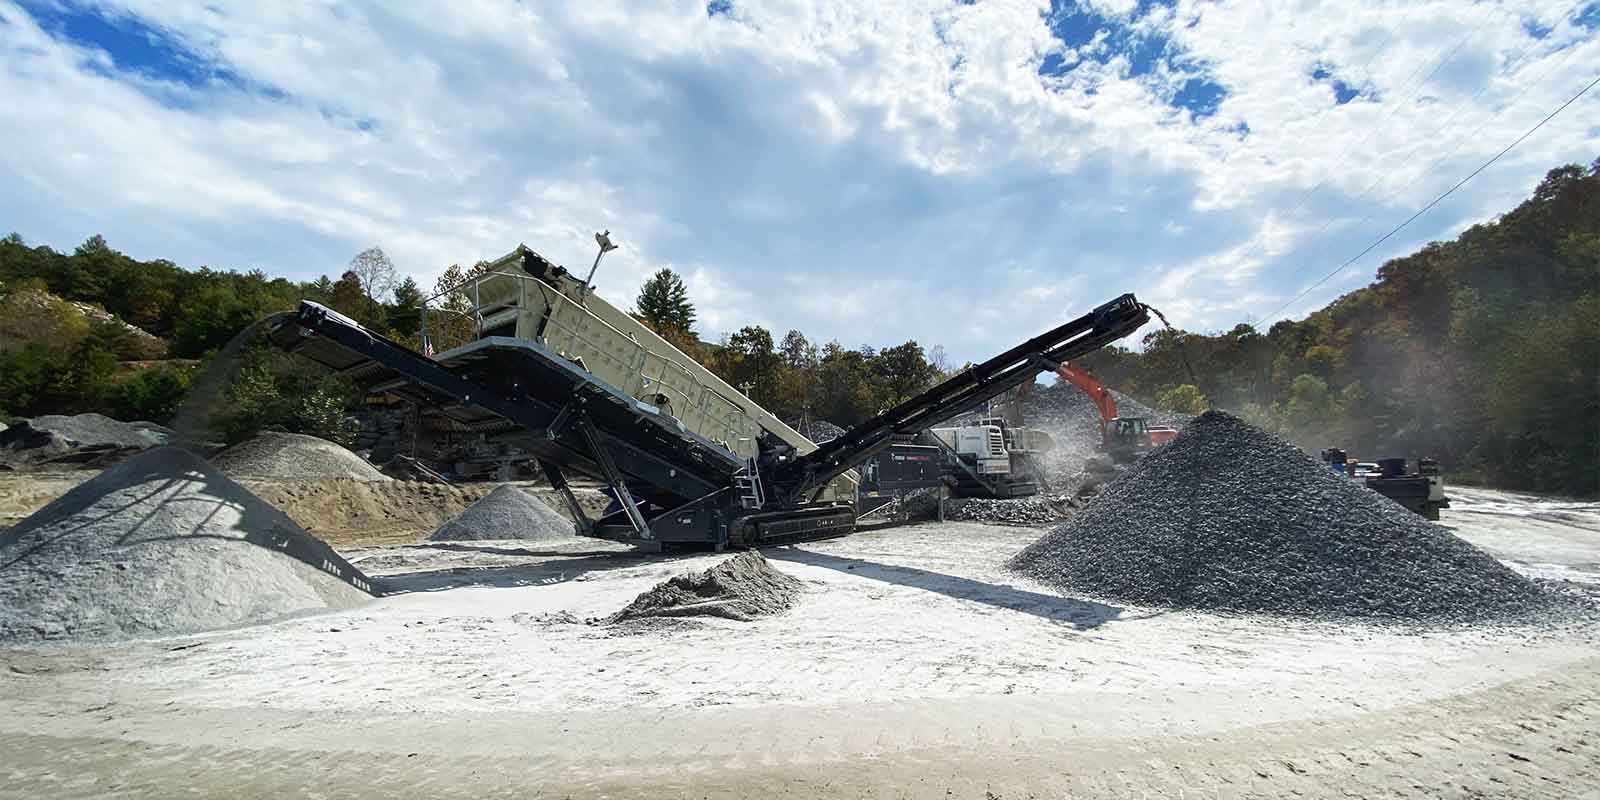 rock crushing equipment at work on a quarry site